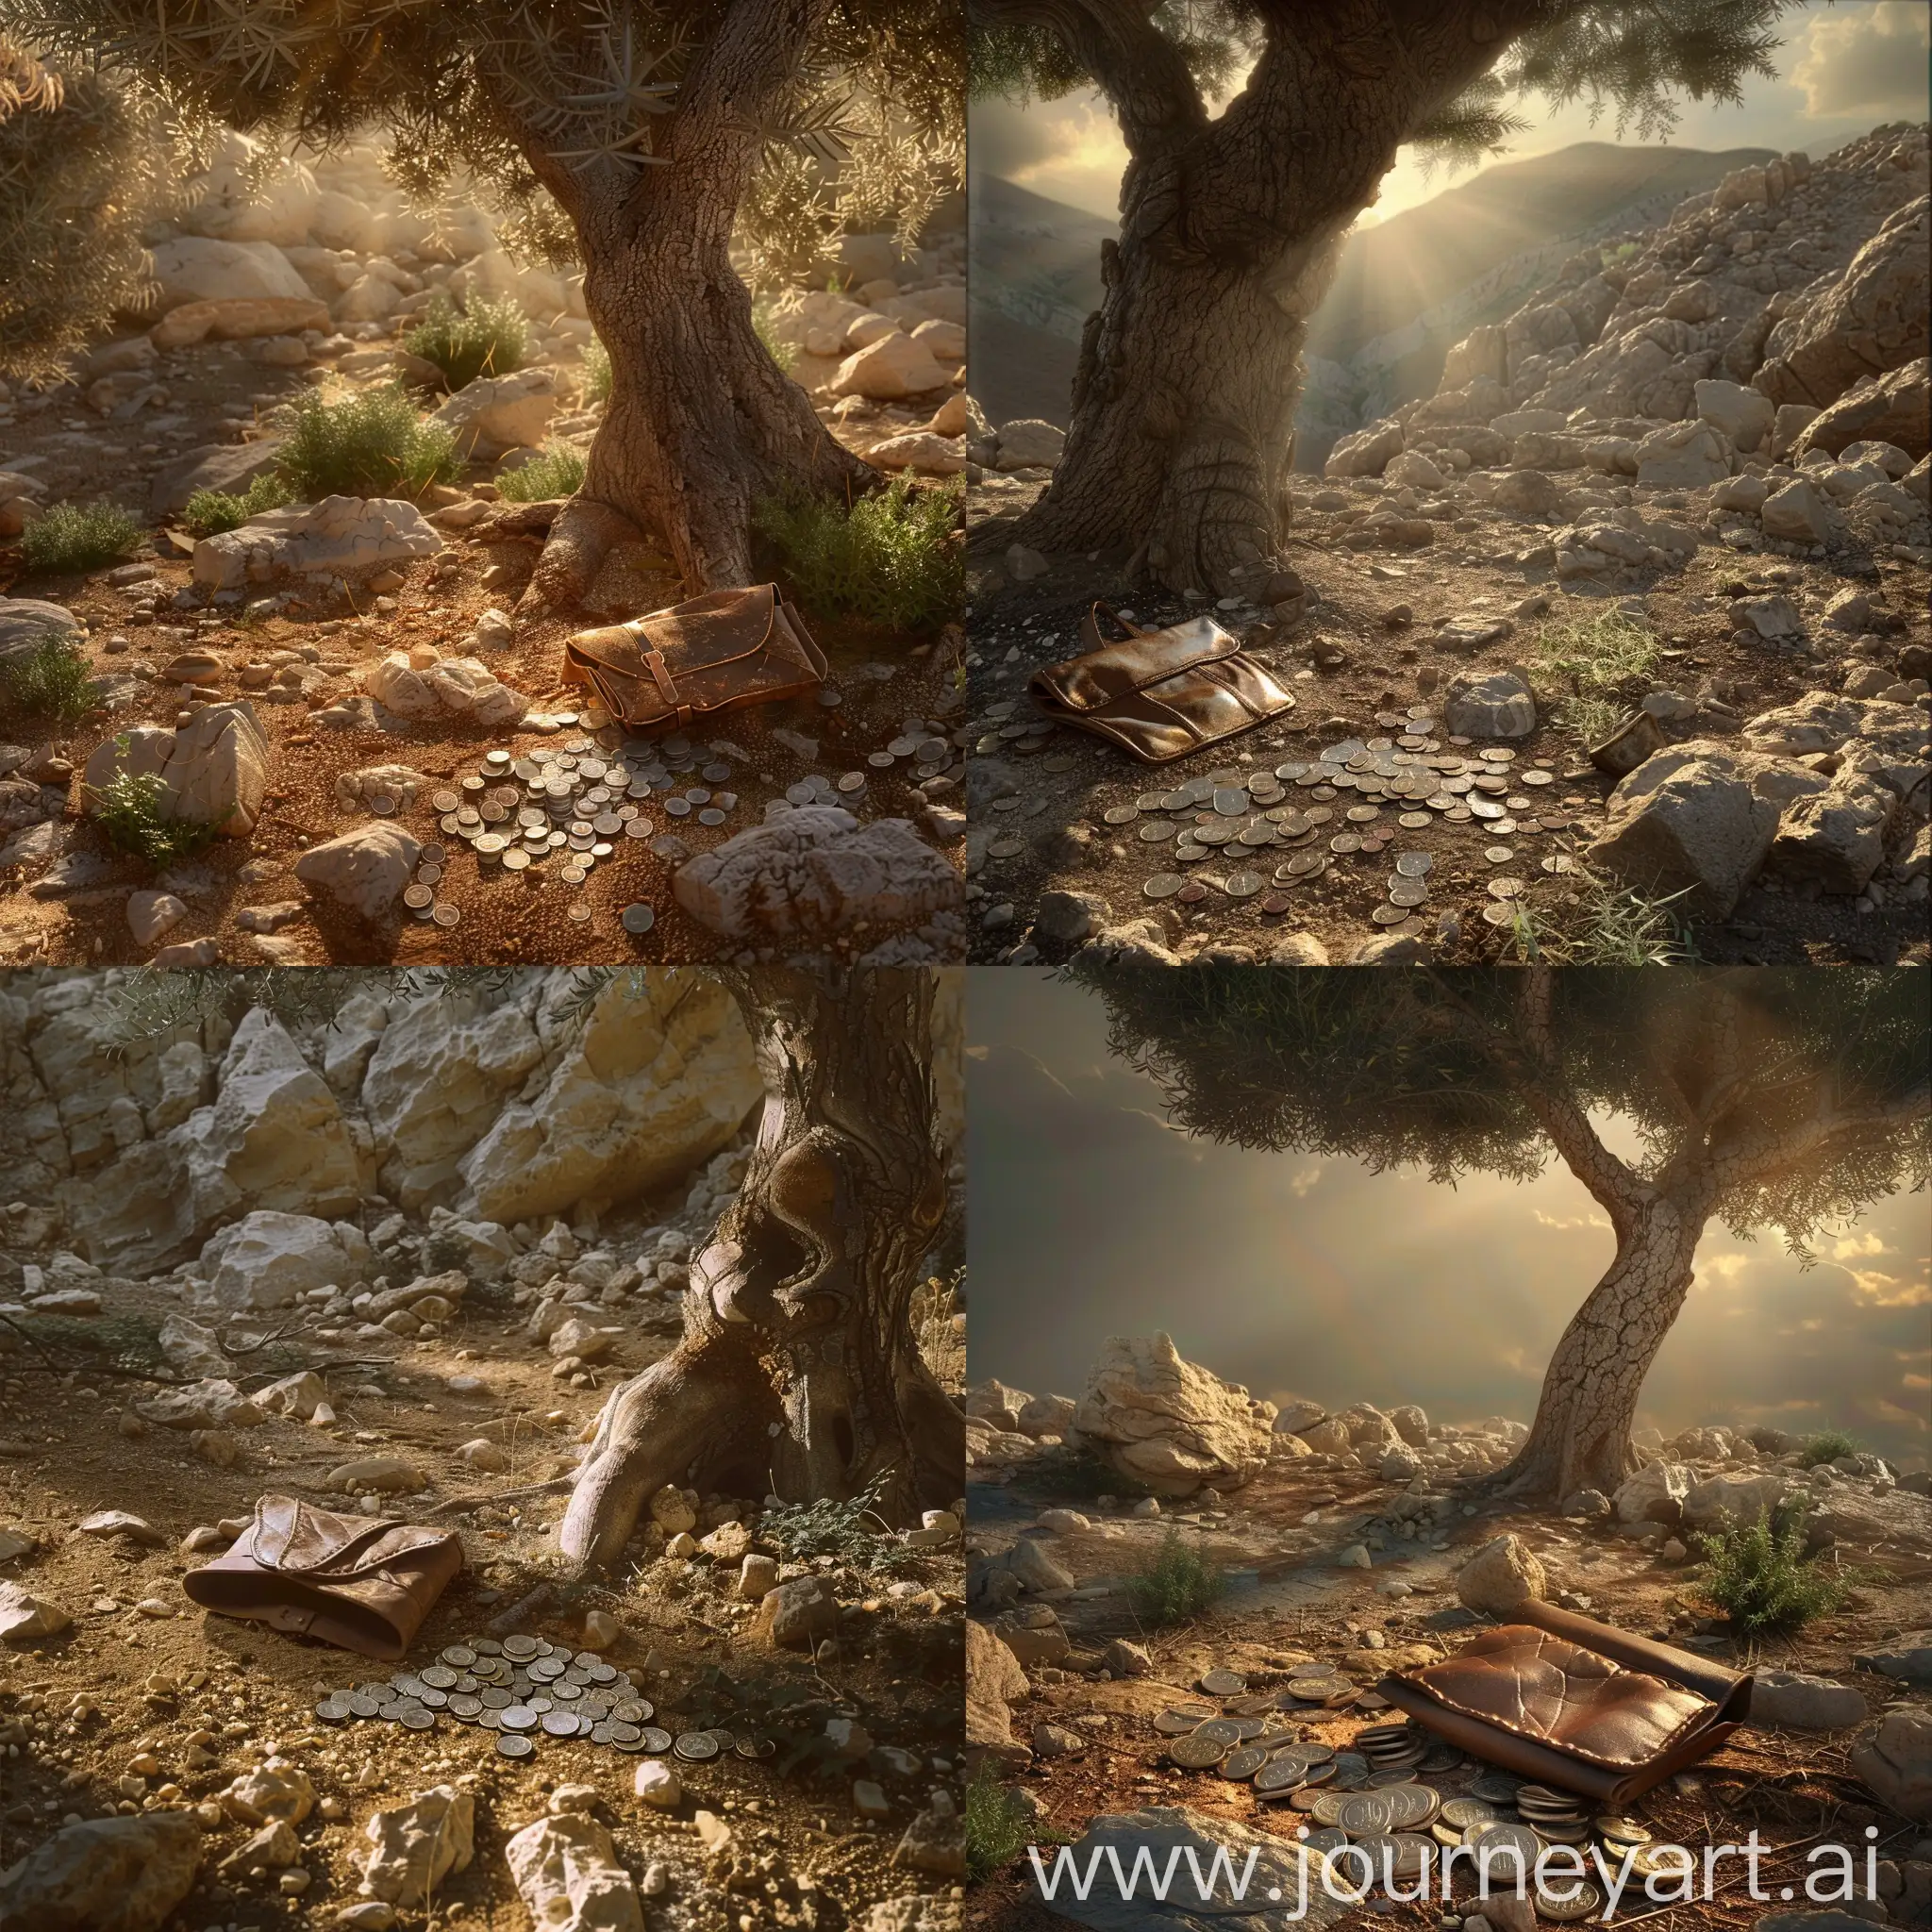 Generate a super realistic image of an evocative scene depicting the betrayal of Judas Iscariot. Picture a towering tree bathed in the alternating light and shadow of the midday sun amidst the rocky reliefs of the Middle East. A small, old leather pouch, made of common and durable material with a simple and rustic finish, lies open and discarded on the ground of dirt and weeds, surrounded by 30 silver coins from the ancient Roman Empire scattered about, symbolizing the price of betrayal.